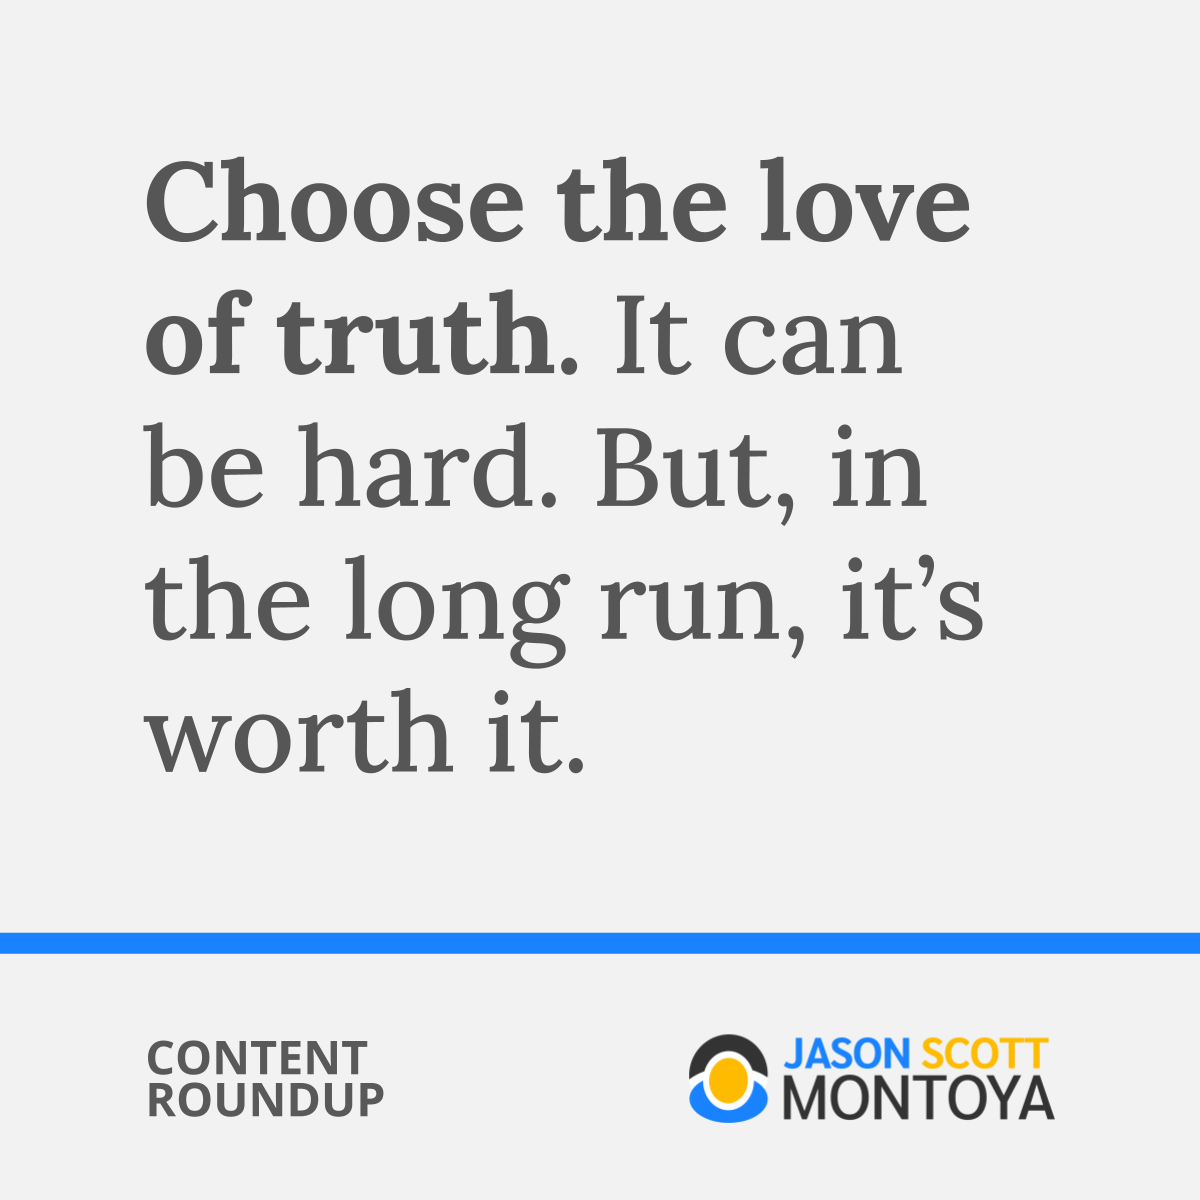 Choose the love of truth. It can be hard. But, in the long run, it’s worth it.